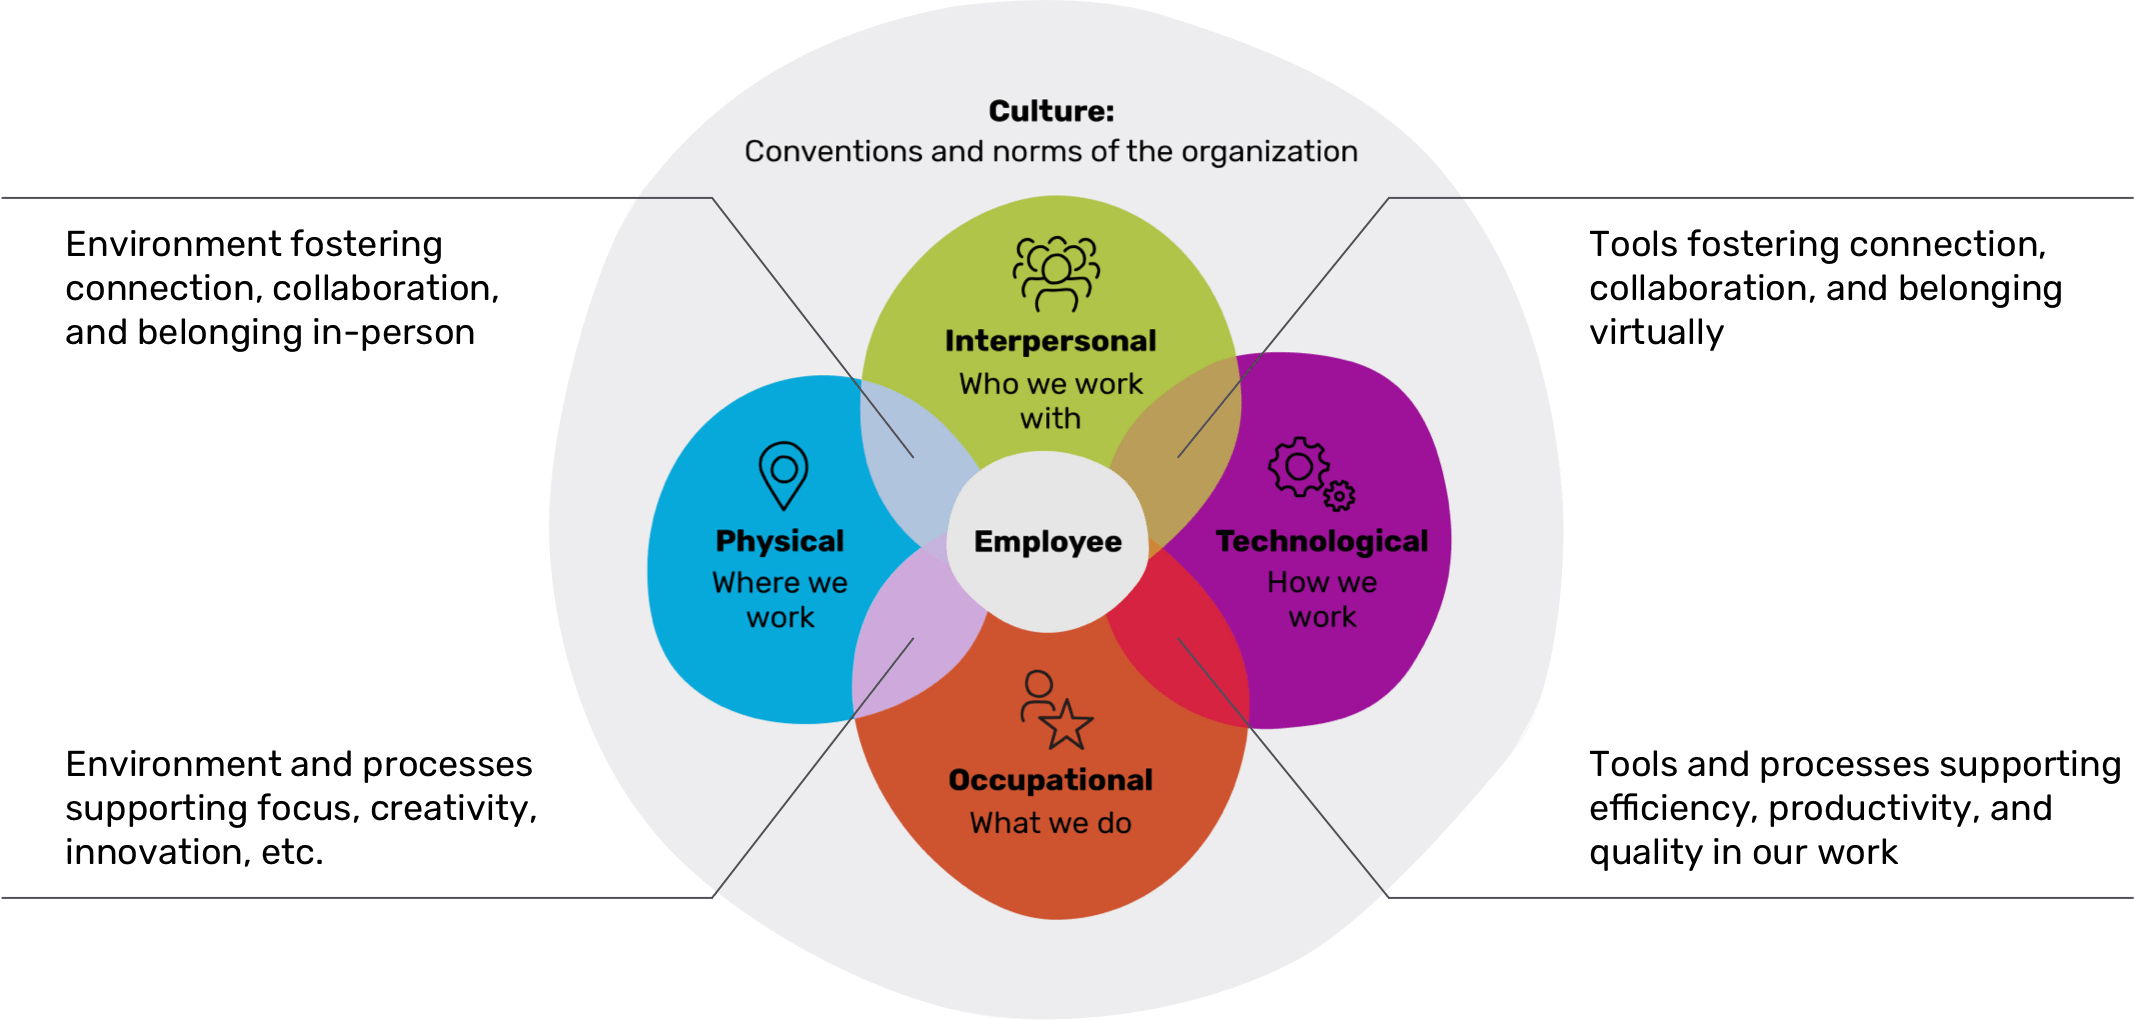 Culture: conventions and norms of the organization